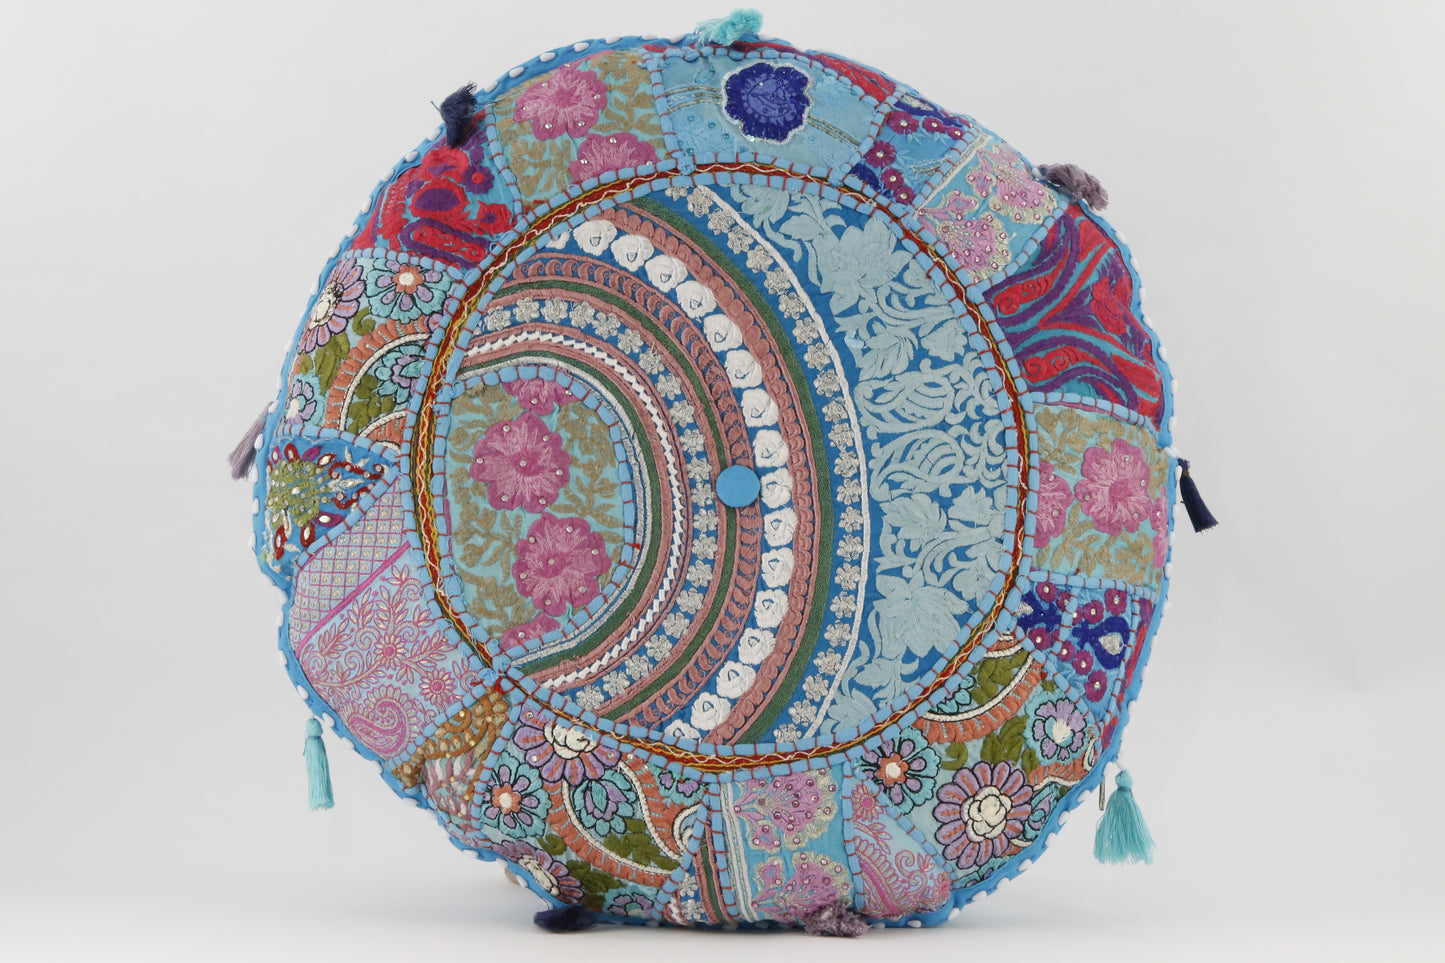 MEDITATION CUSHION TURQUOISE EMBROIDERED ROUND FRONT VIEW